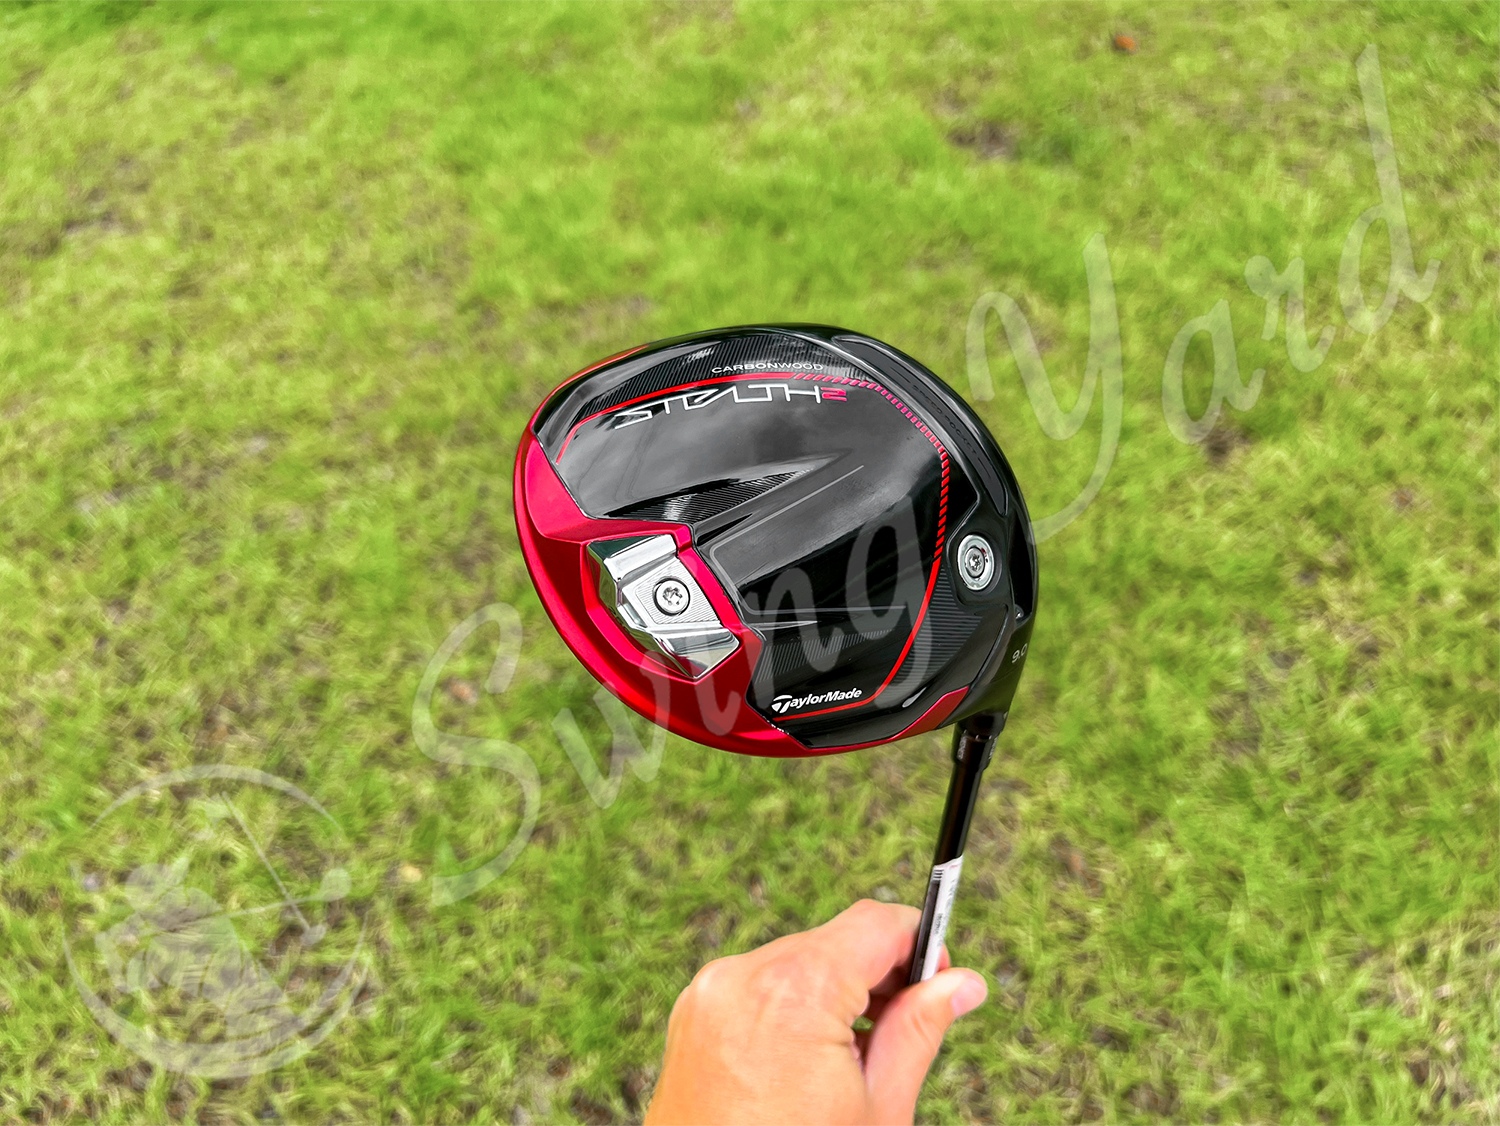 Me showing a frontview of TaylorMade Stealth 2 driver